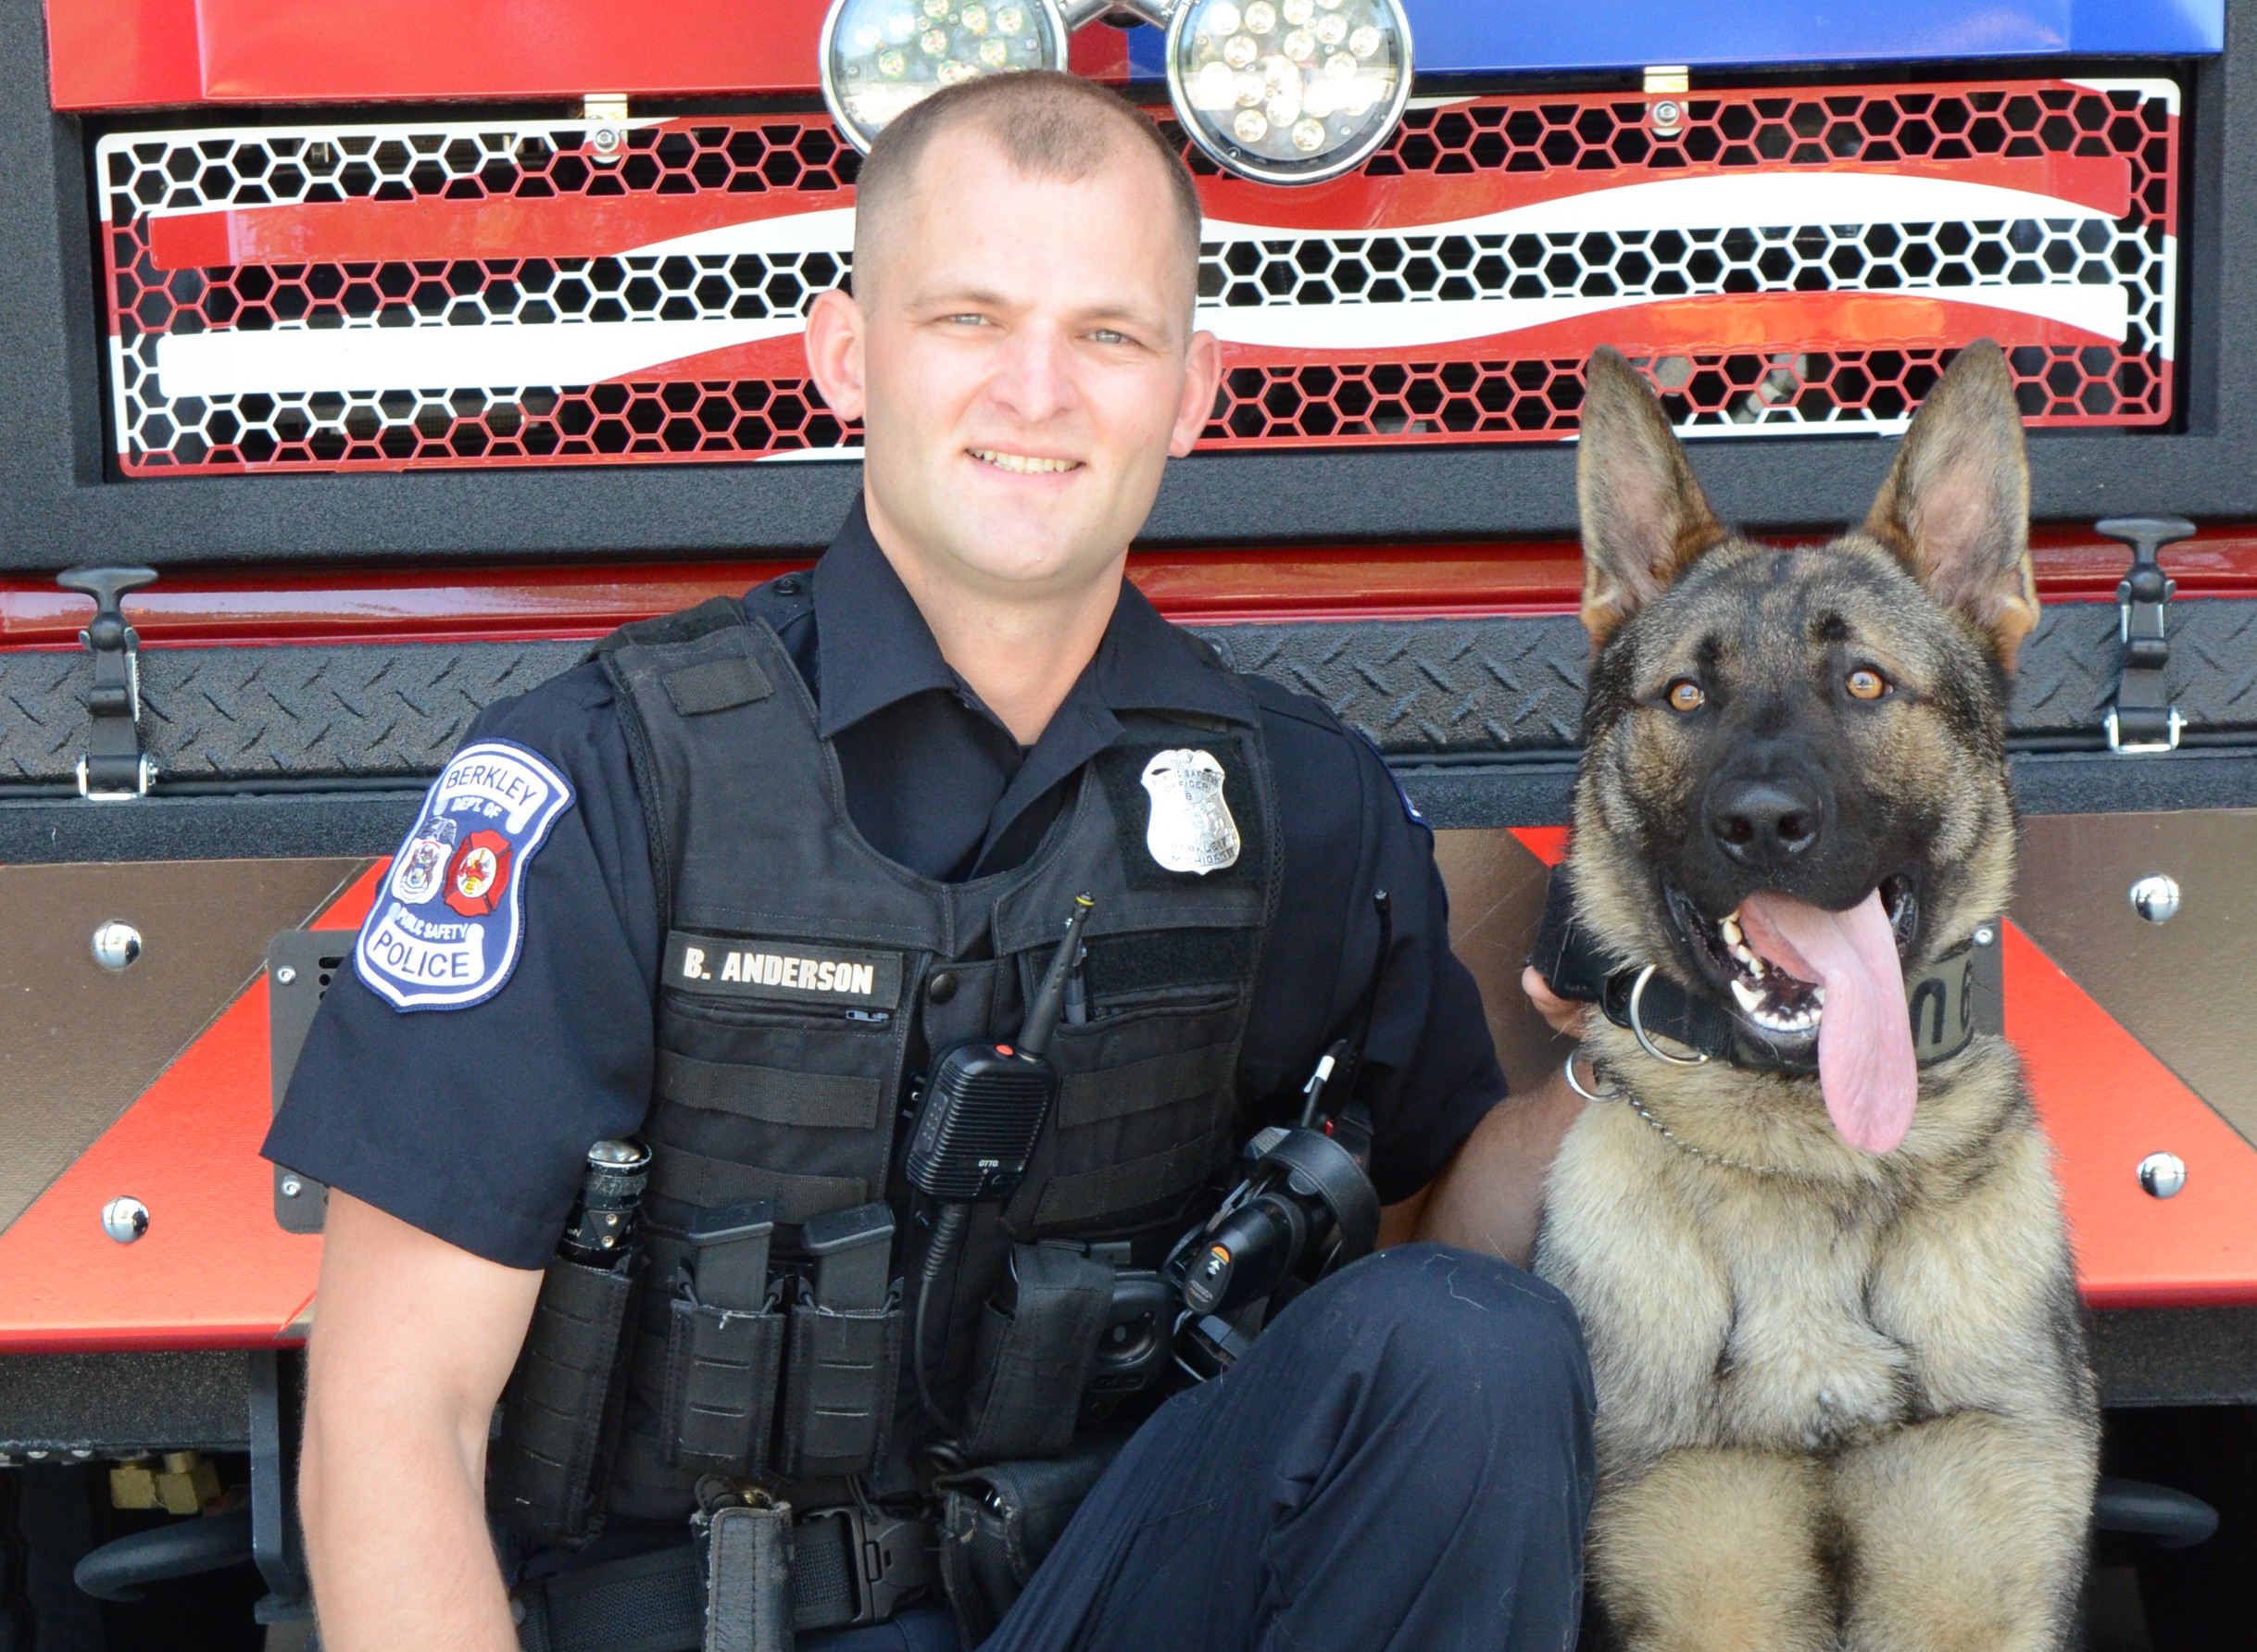 Ofc Anderson & K9 Bear